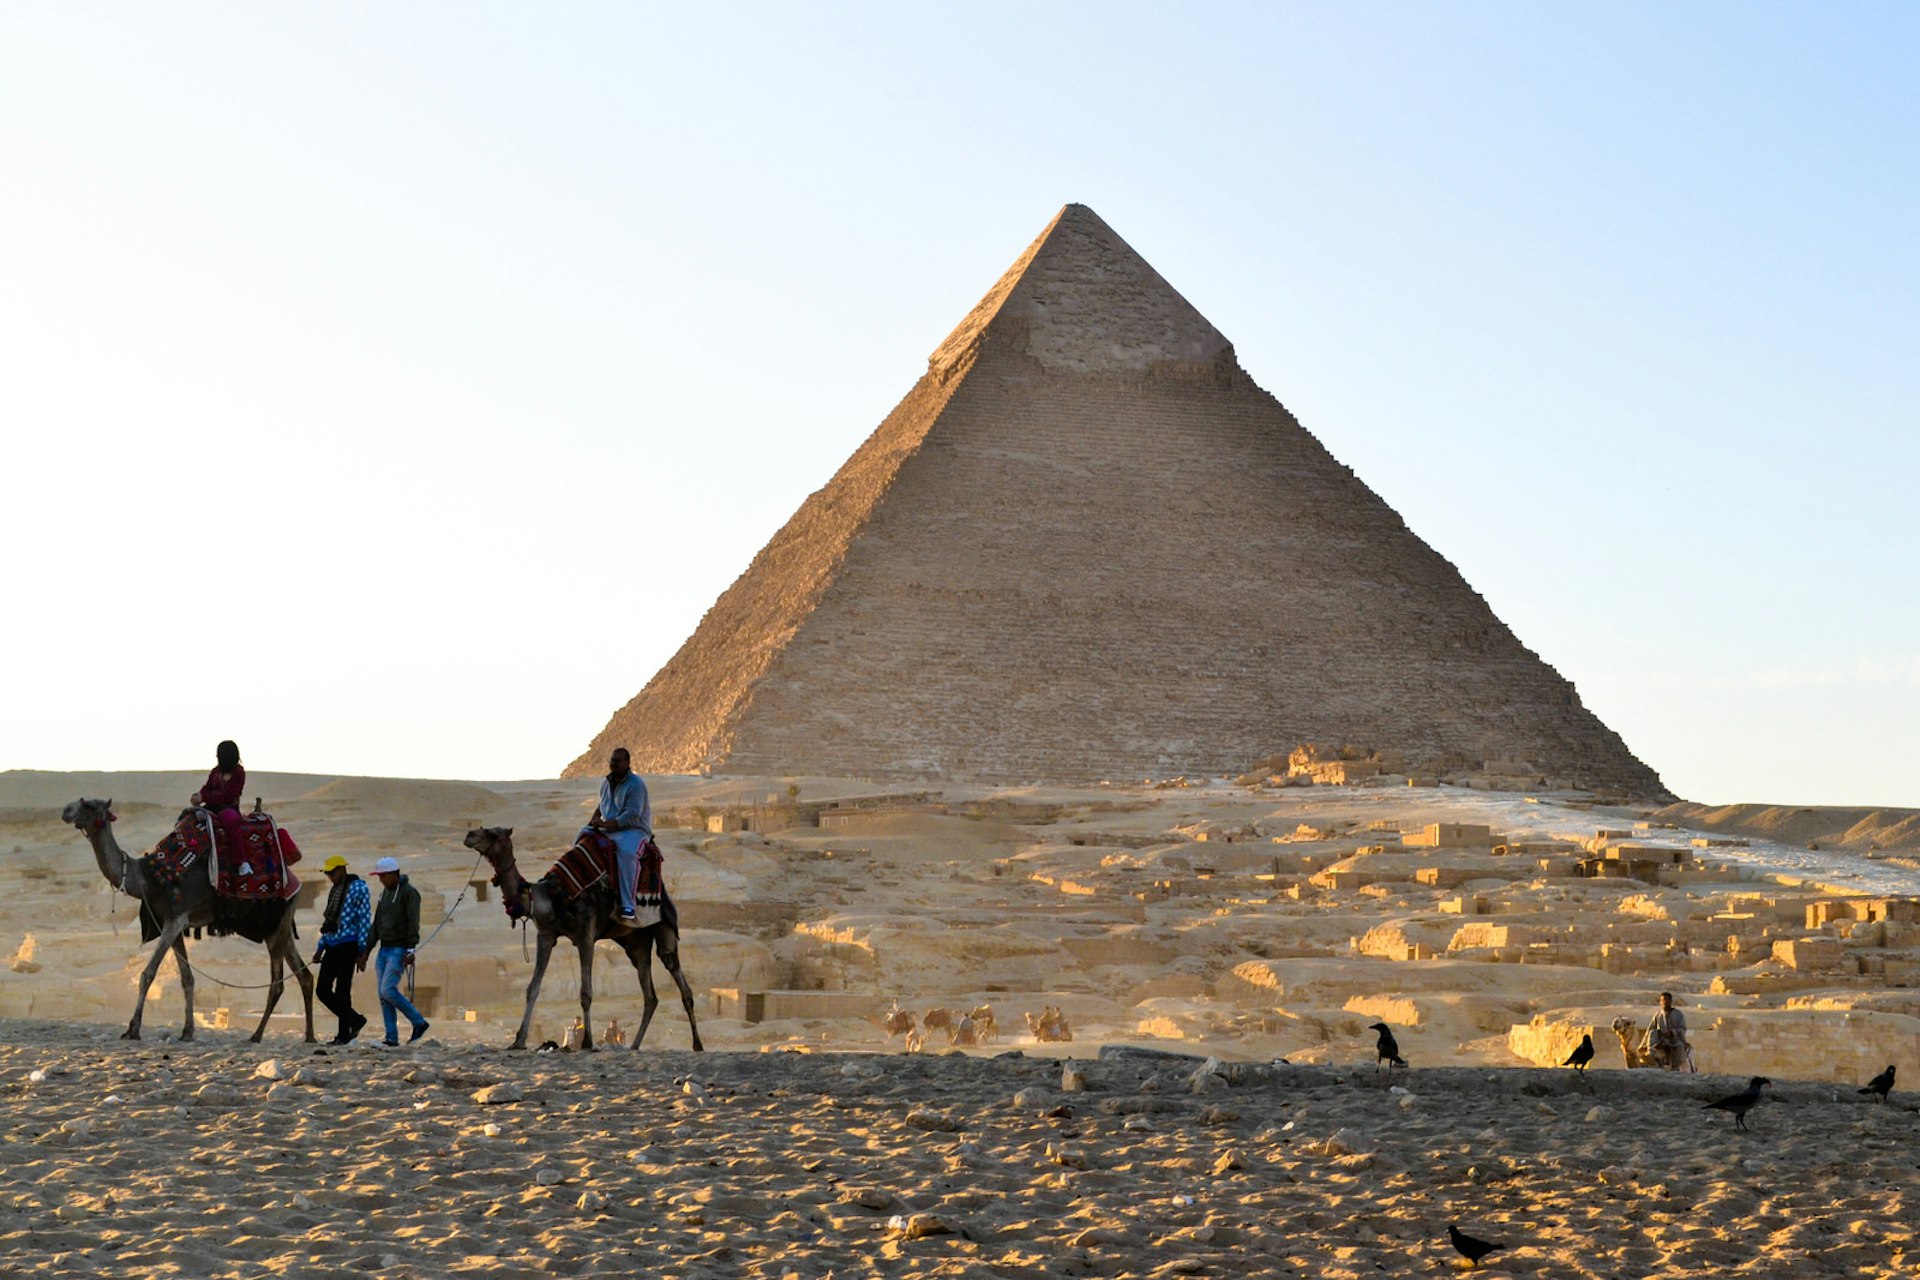 Riders on camels in front of the Pyramids of Giza. Image by Veronika Kovalenko / Shutterstock